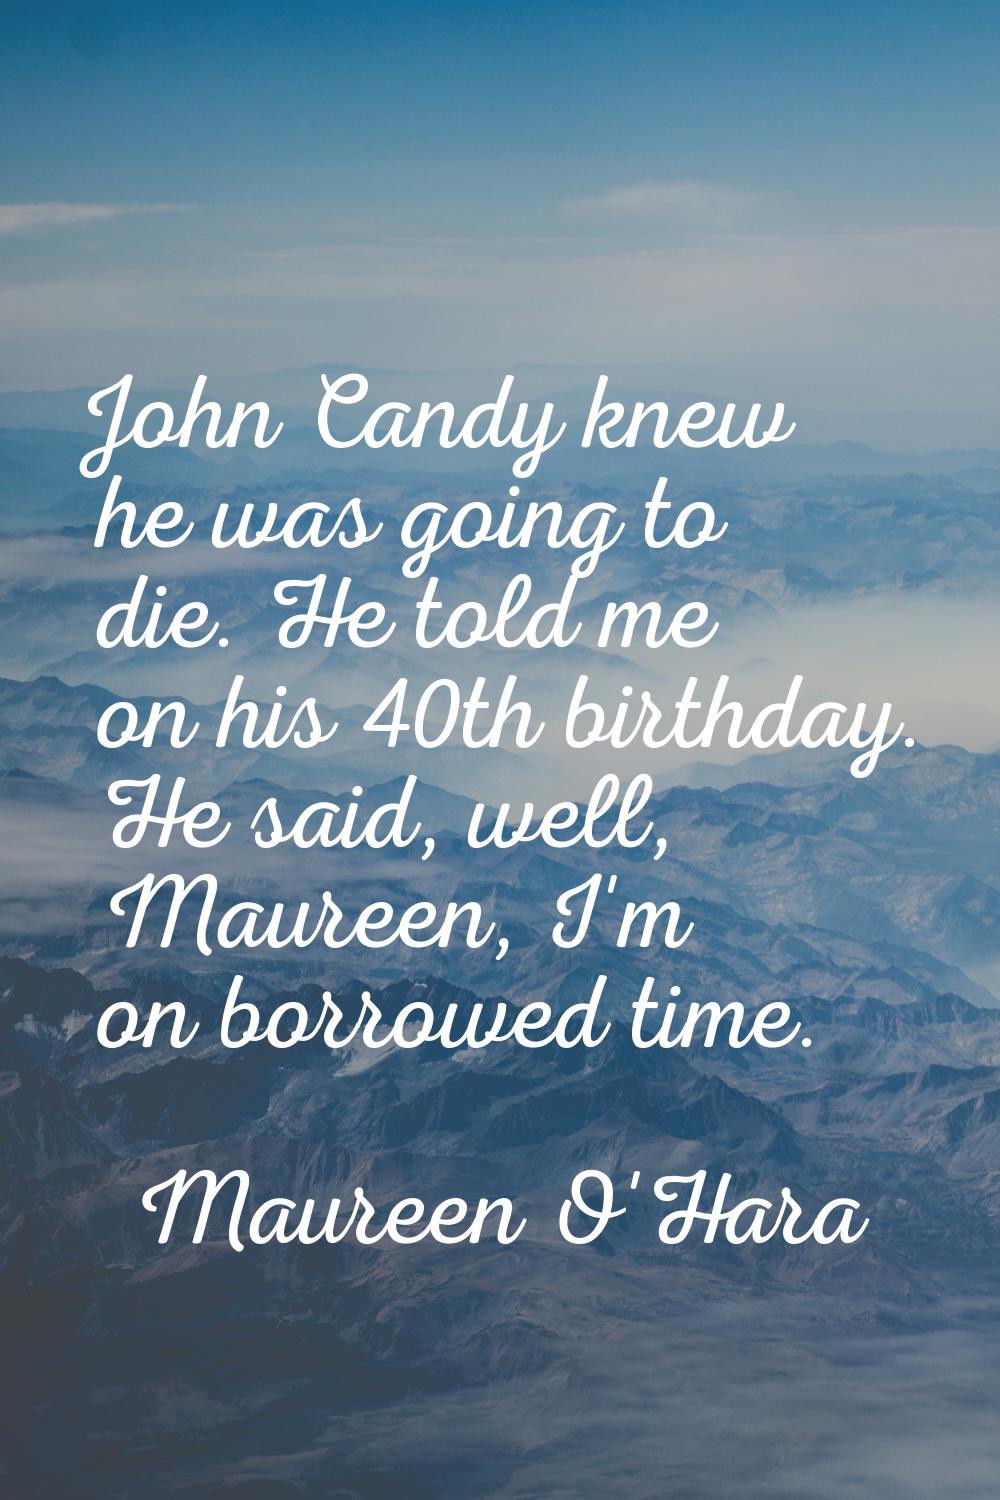 John Candy knew he was going to die. He told me on his 40th birthday. He said, well, Maureen, I'm o